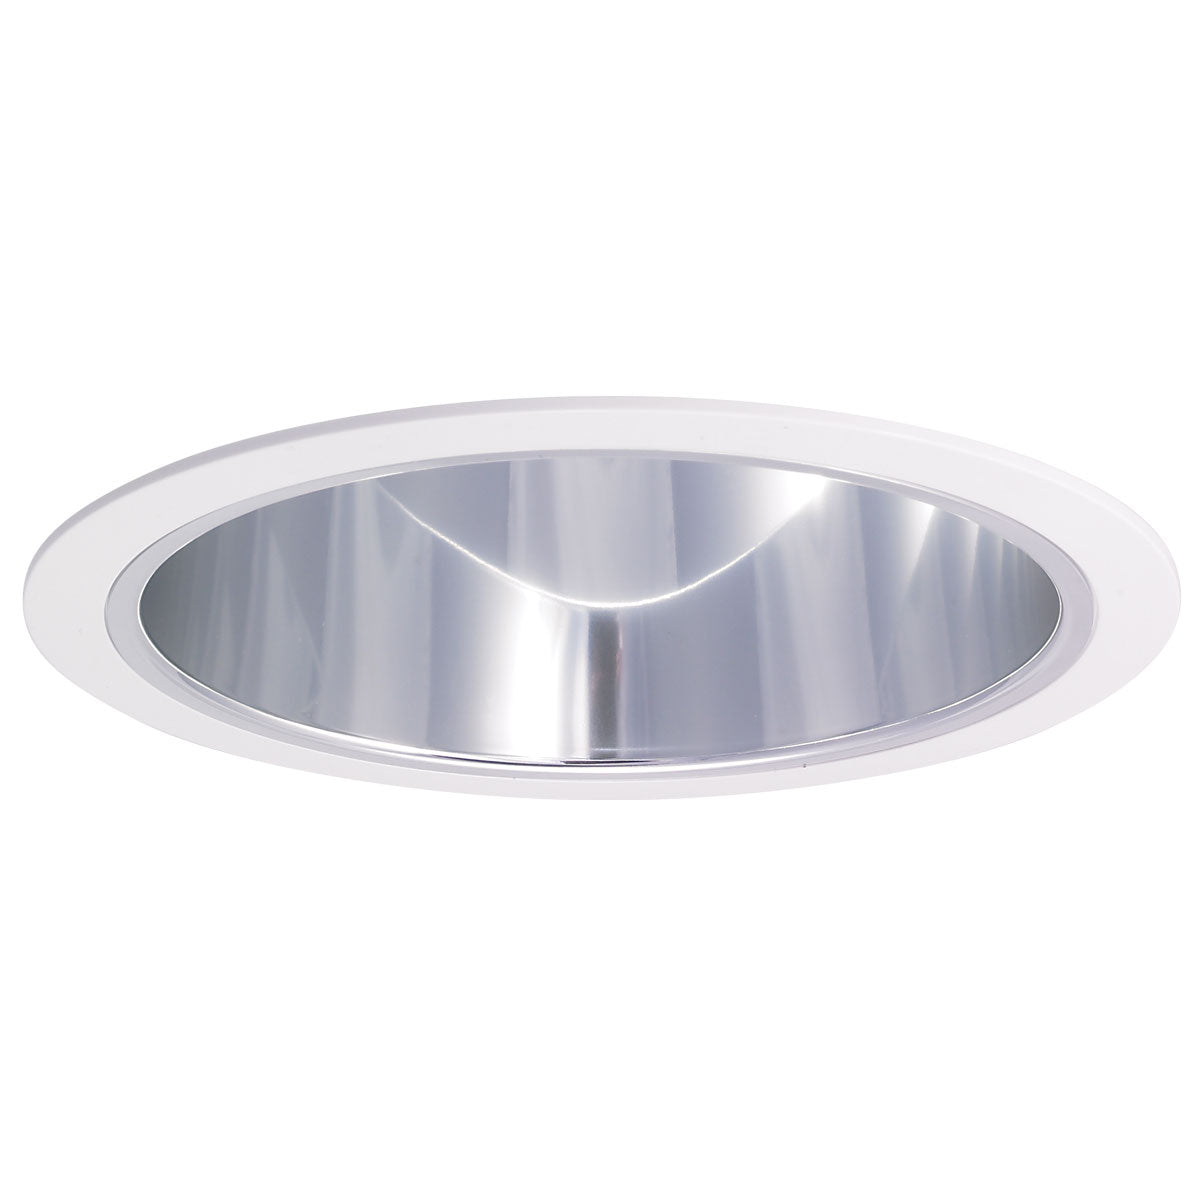 Nora Lighting NTS-714C - Recessed - 6 Inch Specular Clear Reflector w/ White Plastic Ring